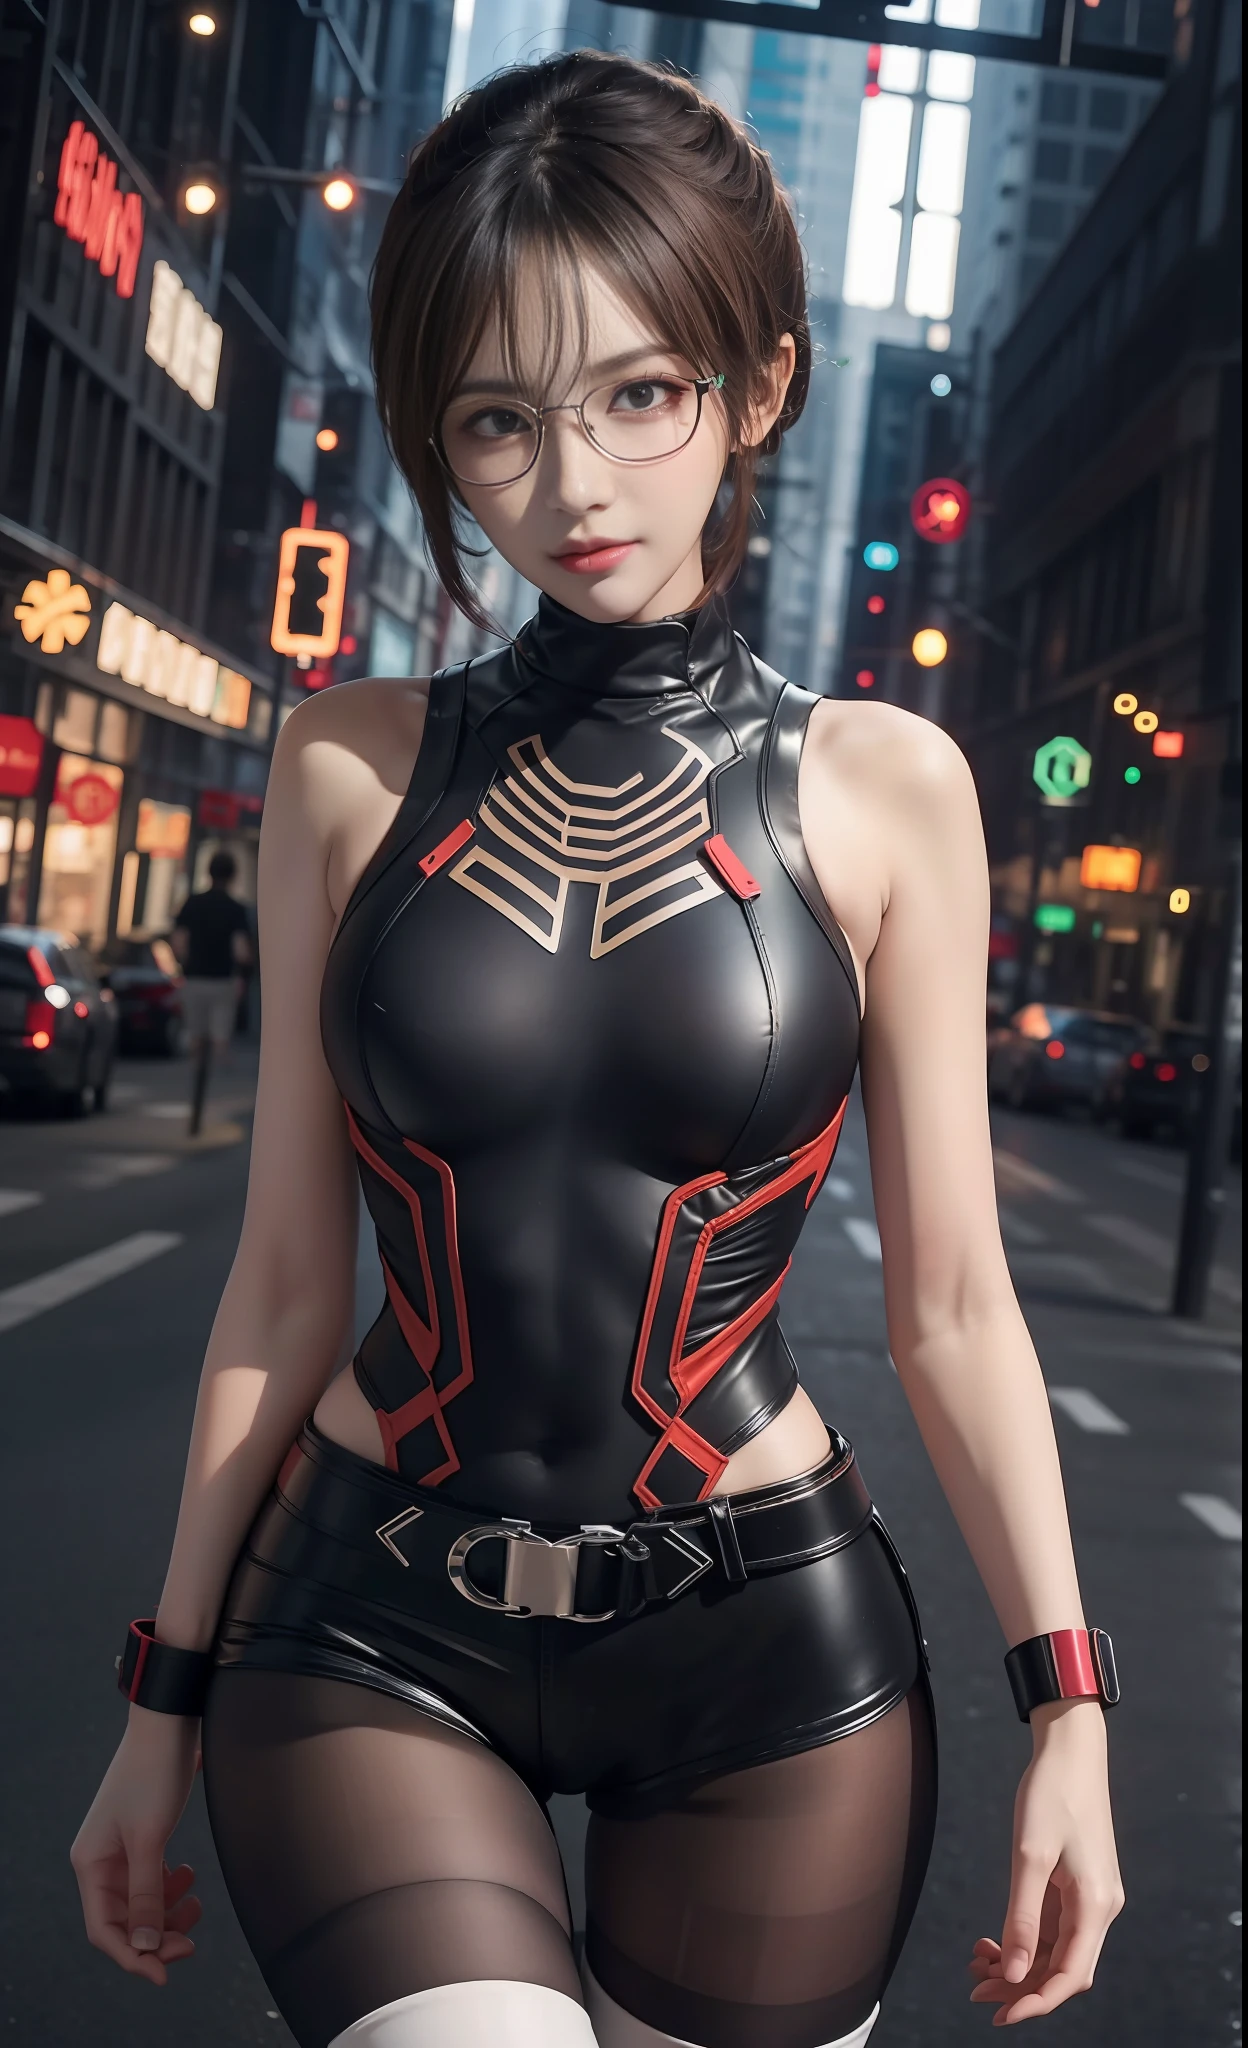 Top quality, delicate face, 20-year-old kpop idol girl, red cyborg body, (medium chest: 1.5), skeleton of metal structure, mechanical joints, bangs, (Pafia Leola), (1.2), cyberpunk, sci-fi, shorts. Neon Street. Headphone. Bodysuit. Glasses. Big .